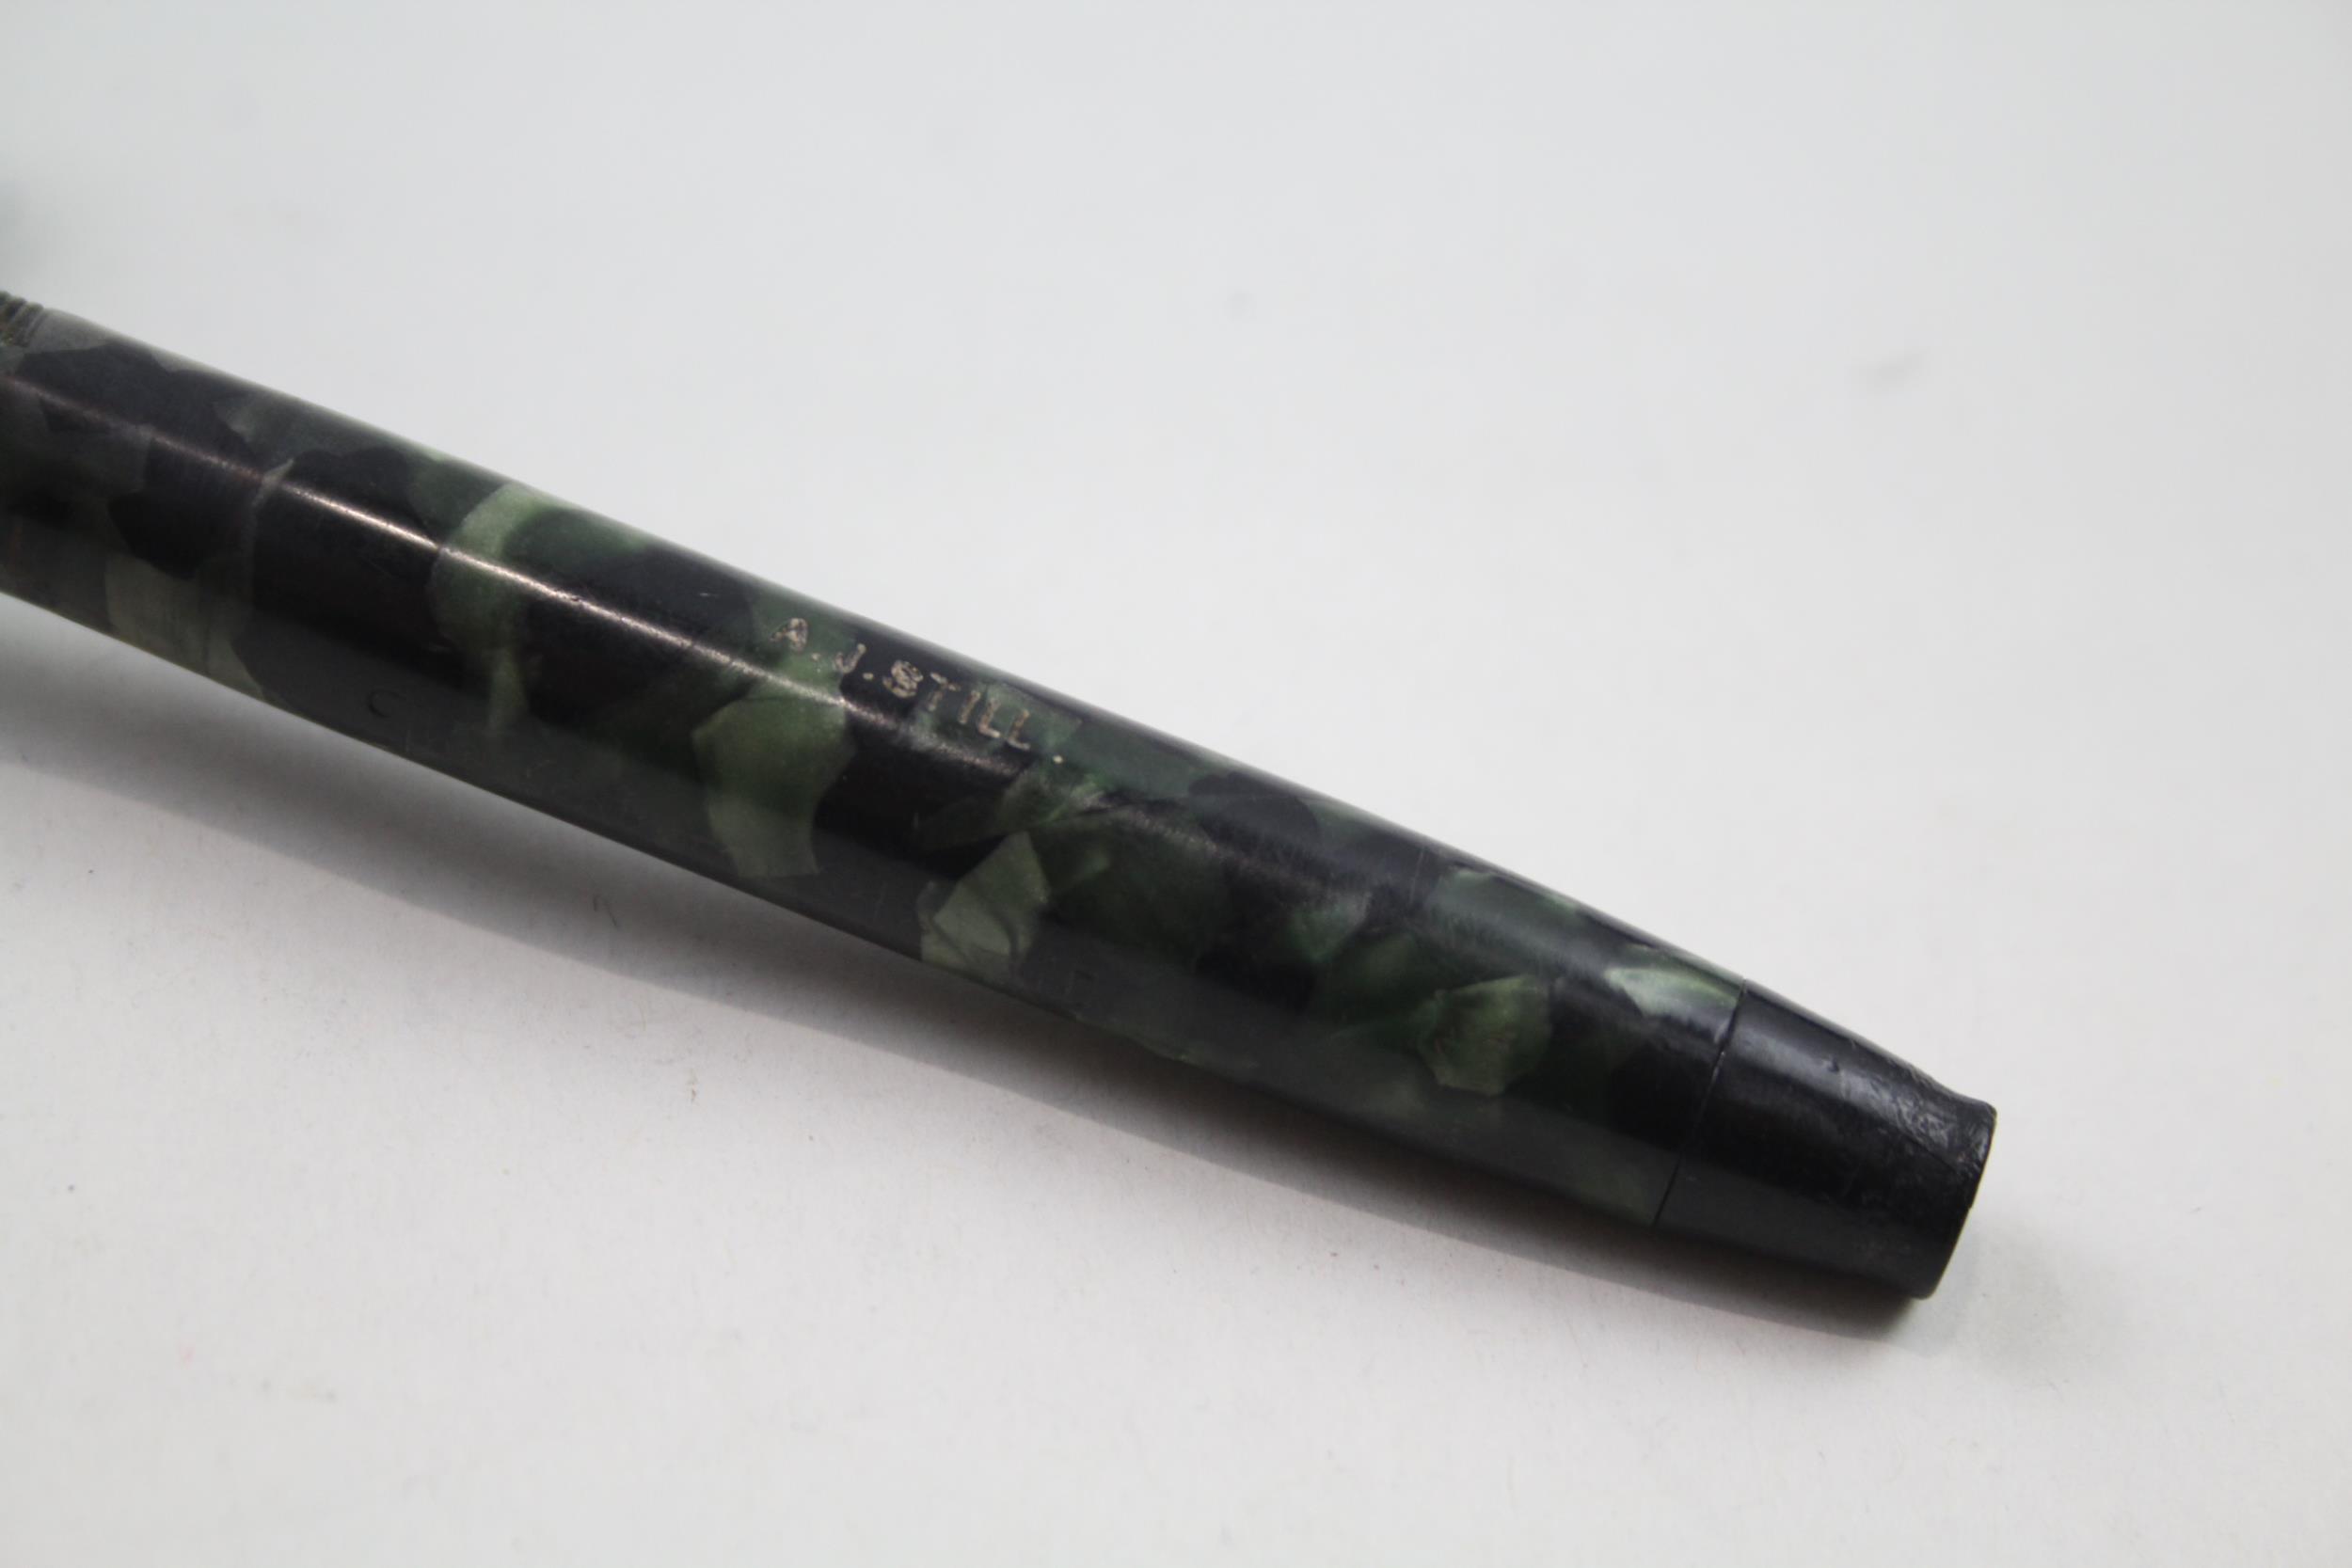 Vintage CONWAY STEWART No.266 Green Fountain Pen w/ 14ct Gold Nib WRITING // w/ Personal Engraving - Image 3 of 8